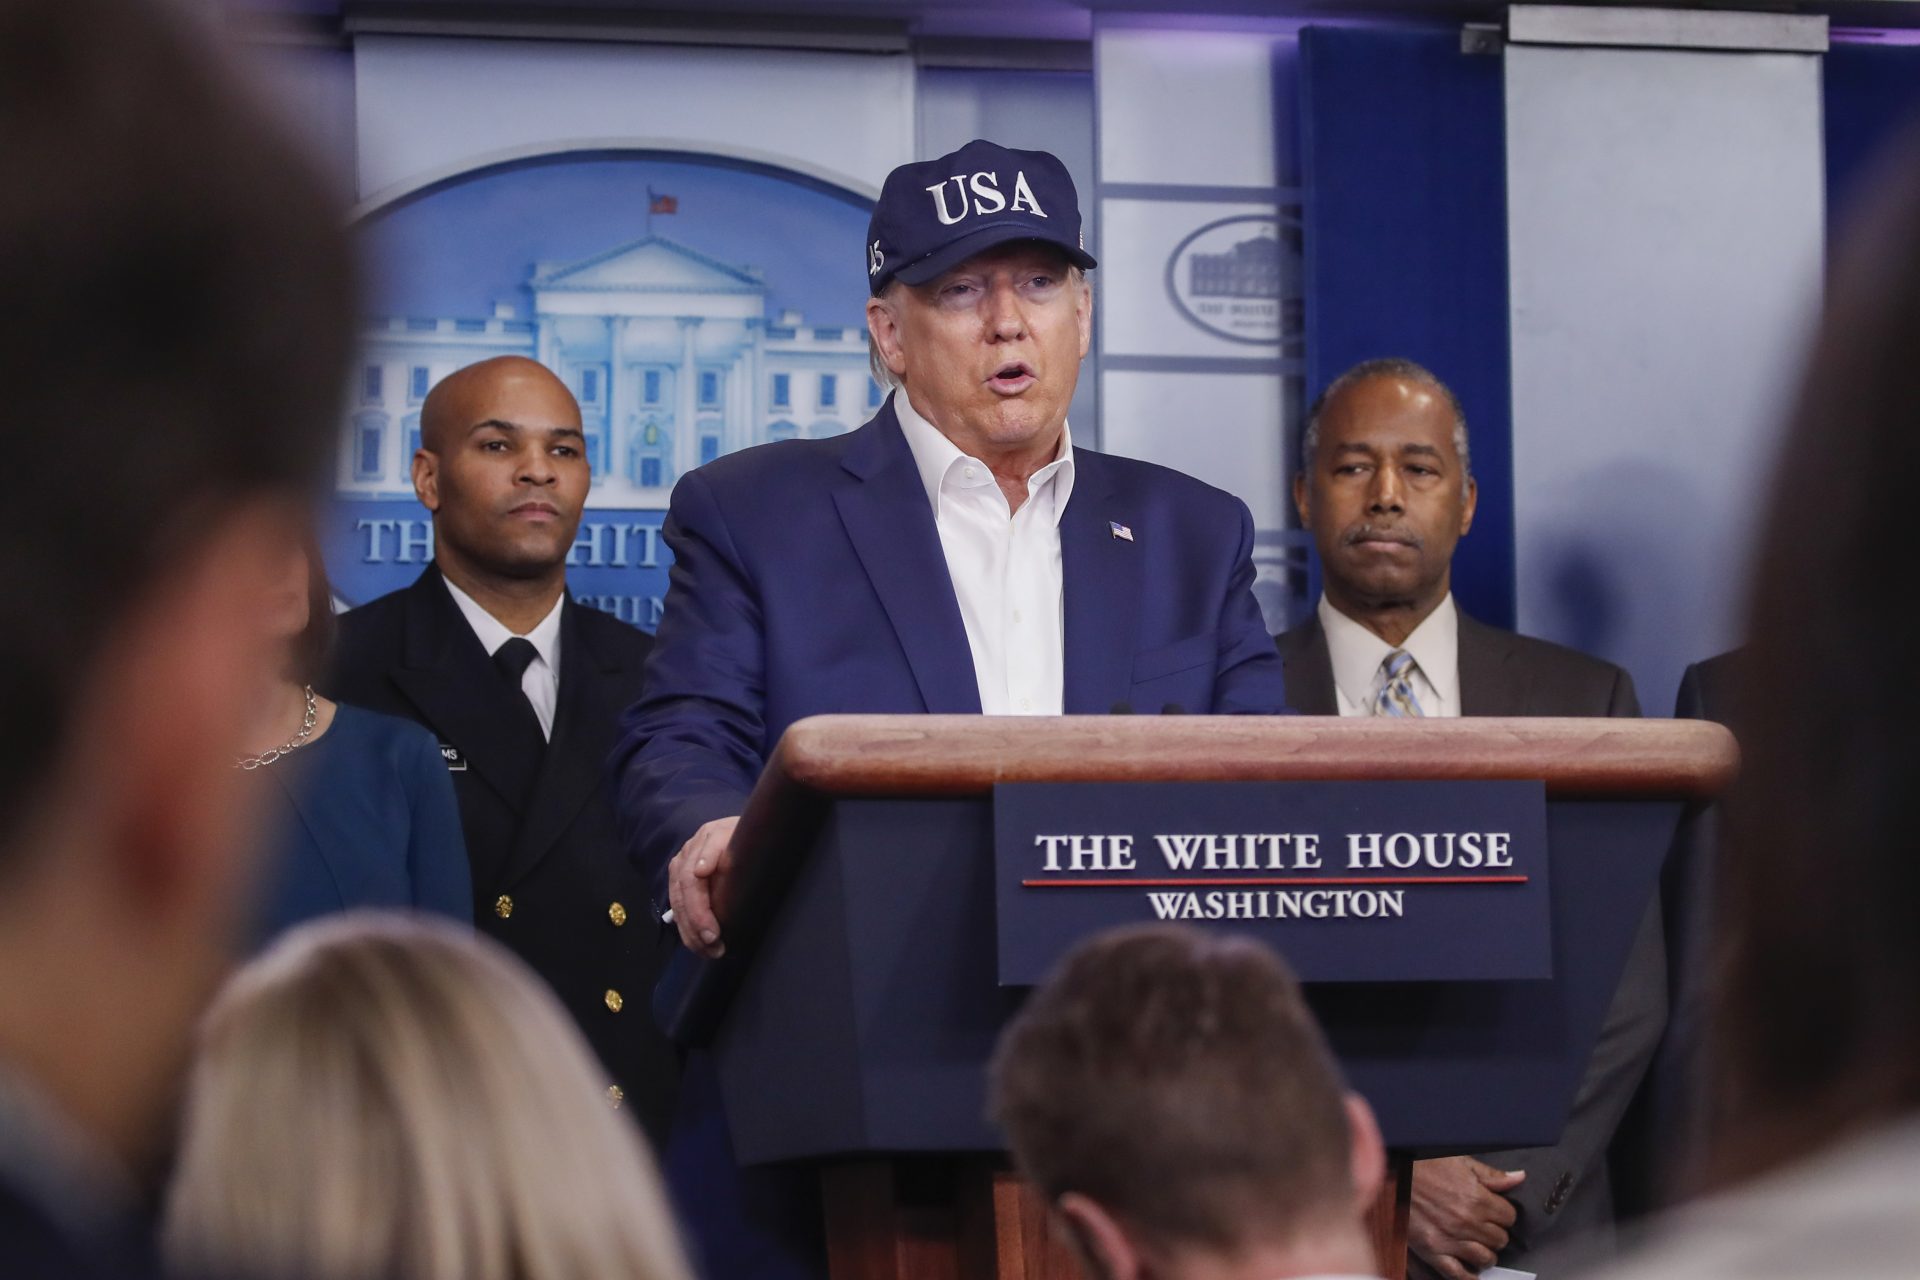 President Donald Trump speaks during a briefing on coronavirus in the Brady press briefing room at the White House, Saturday, March 14, 2020, in Washington, as U.S. Surgeon General Jerome Adams and Housing and Urban Development Secretary Ben Carson listen.